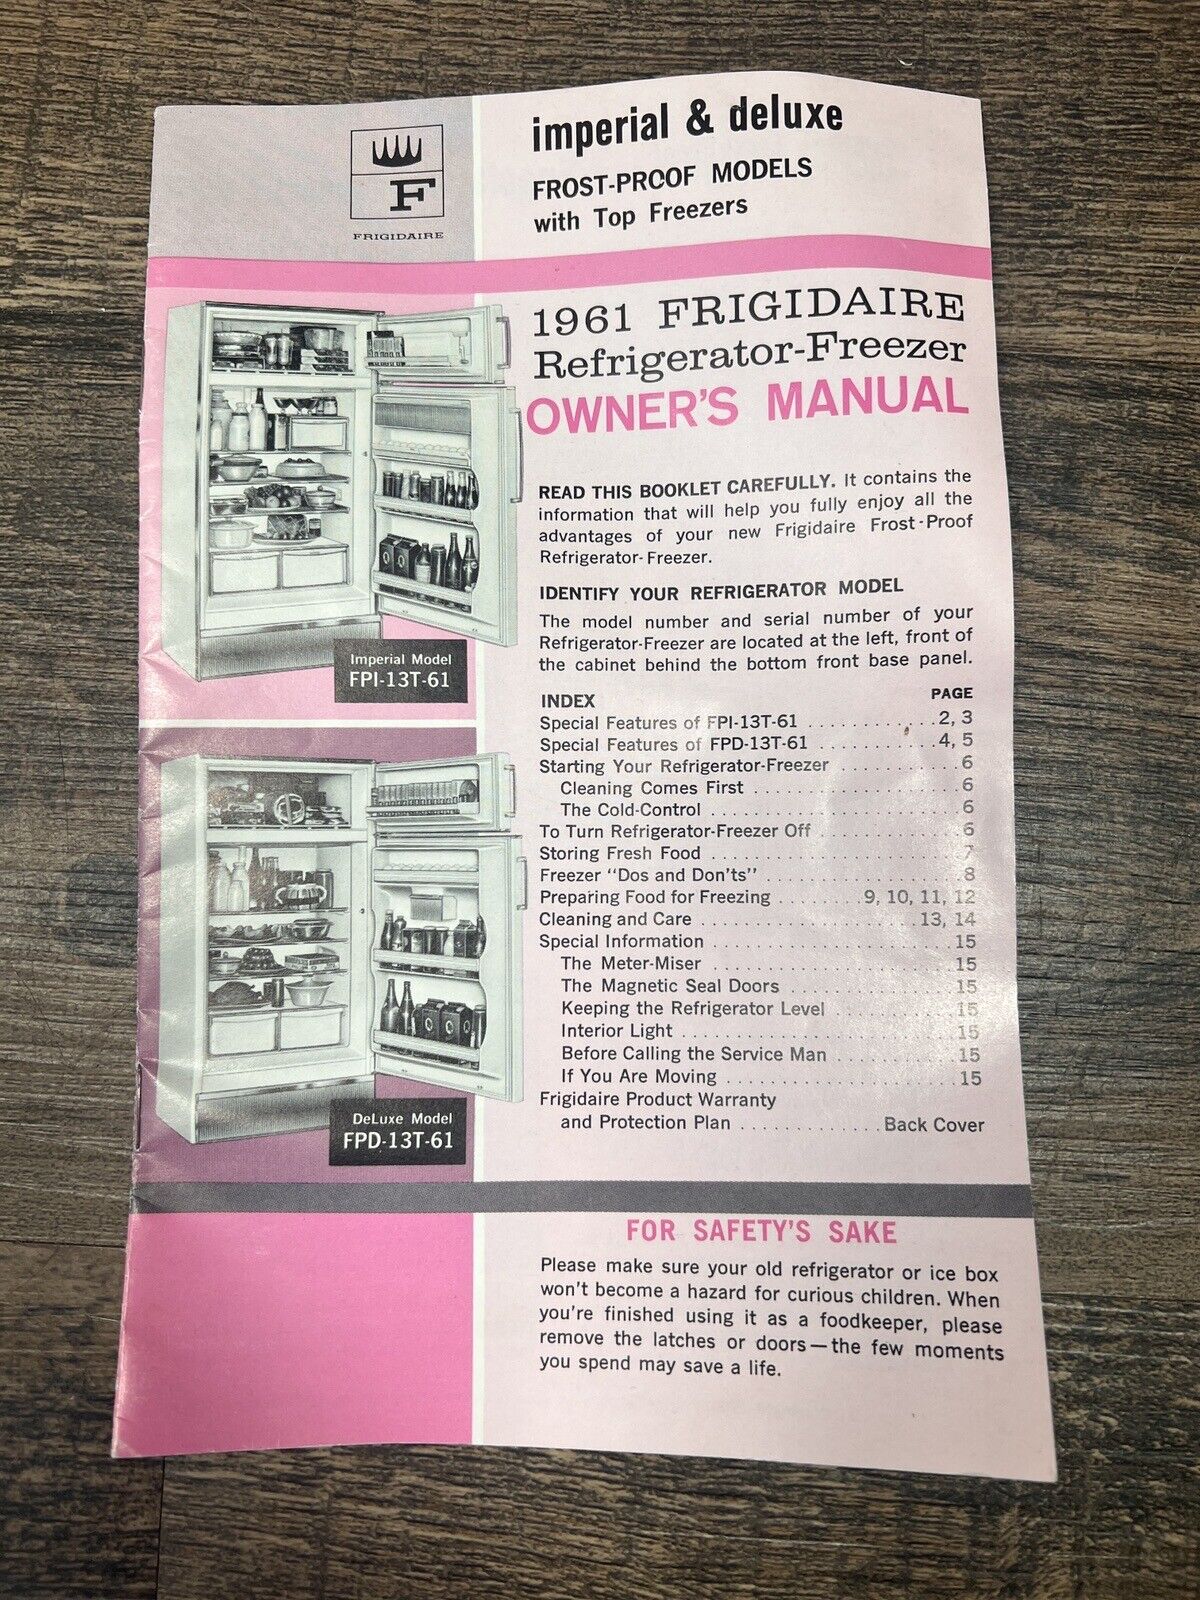 Vintage 1961 FRIGIDAIRE Refrigerator-Freezer Owner\'s Manual Imperial & Deluxe